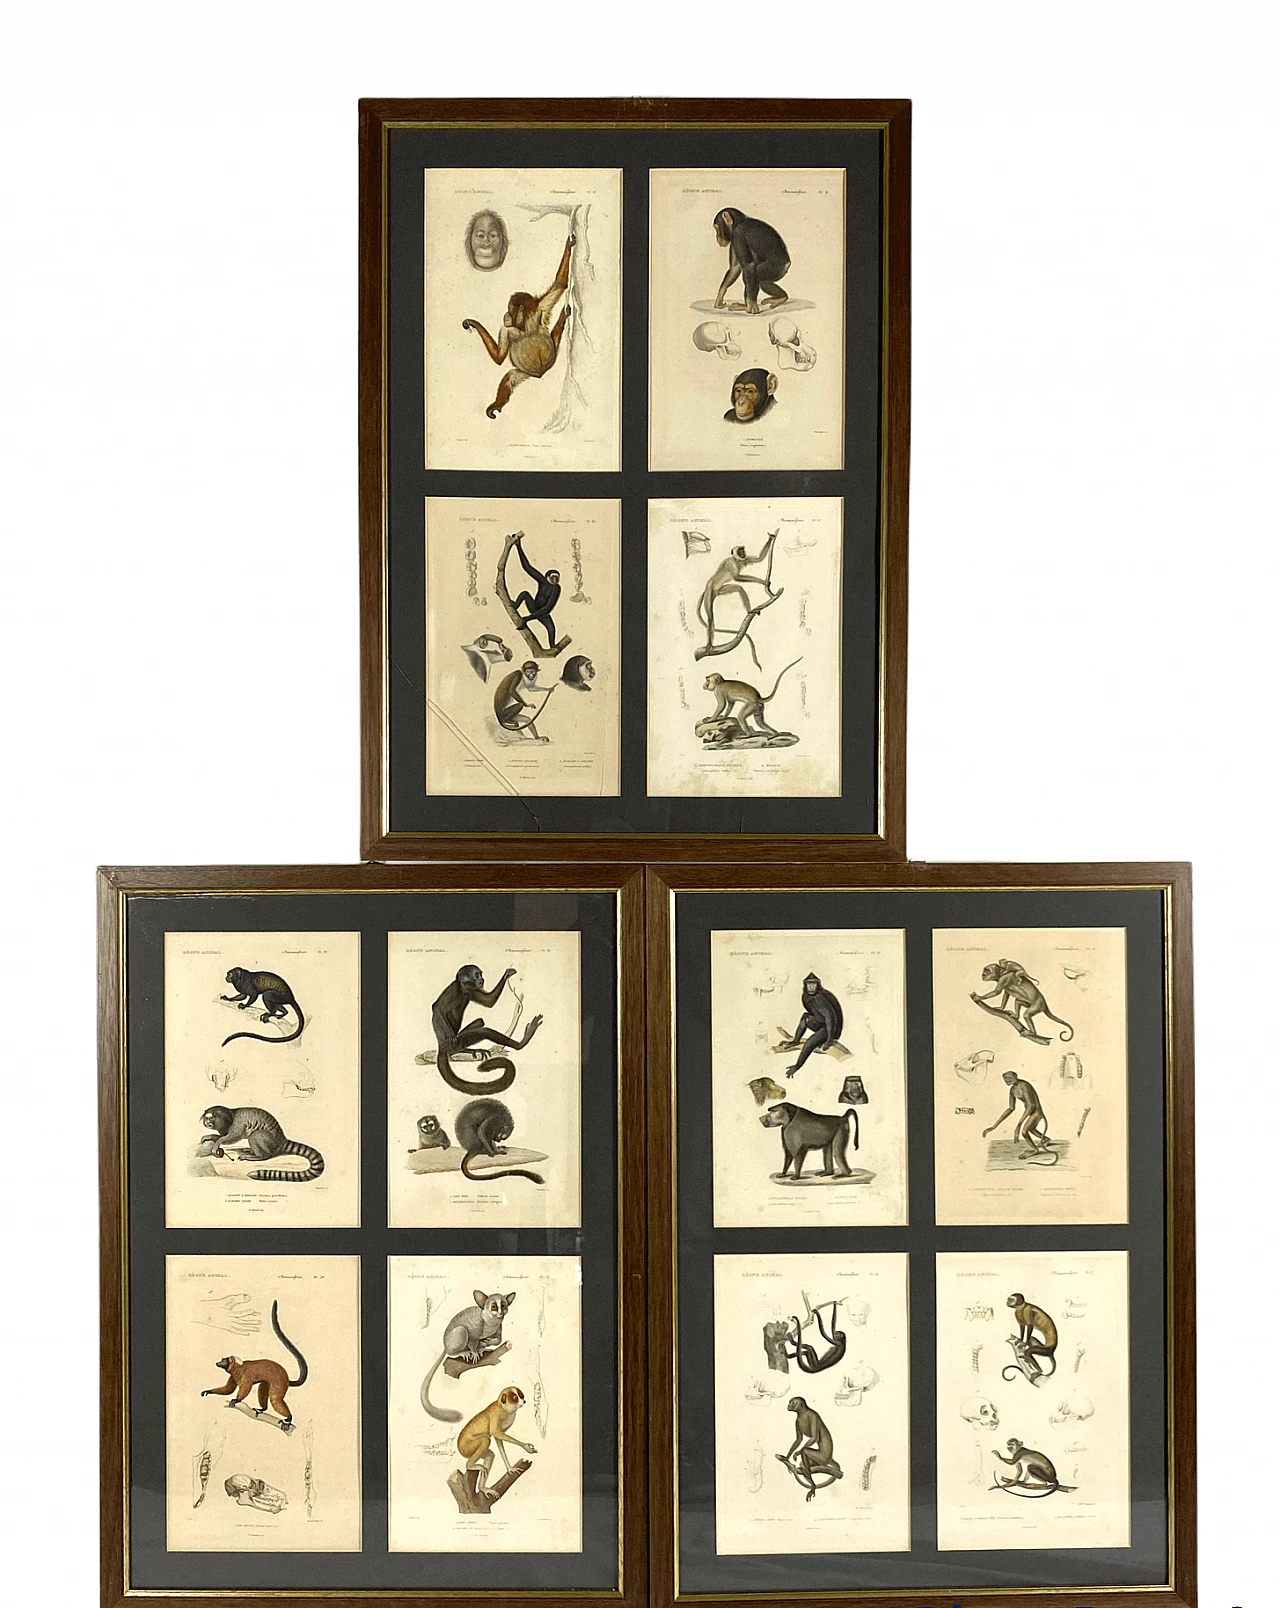 3 Framed panels with 12 engravings from "Le Règne Animal" Georges Cuvier, 19th century 1470808